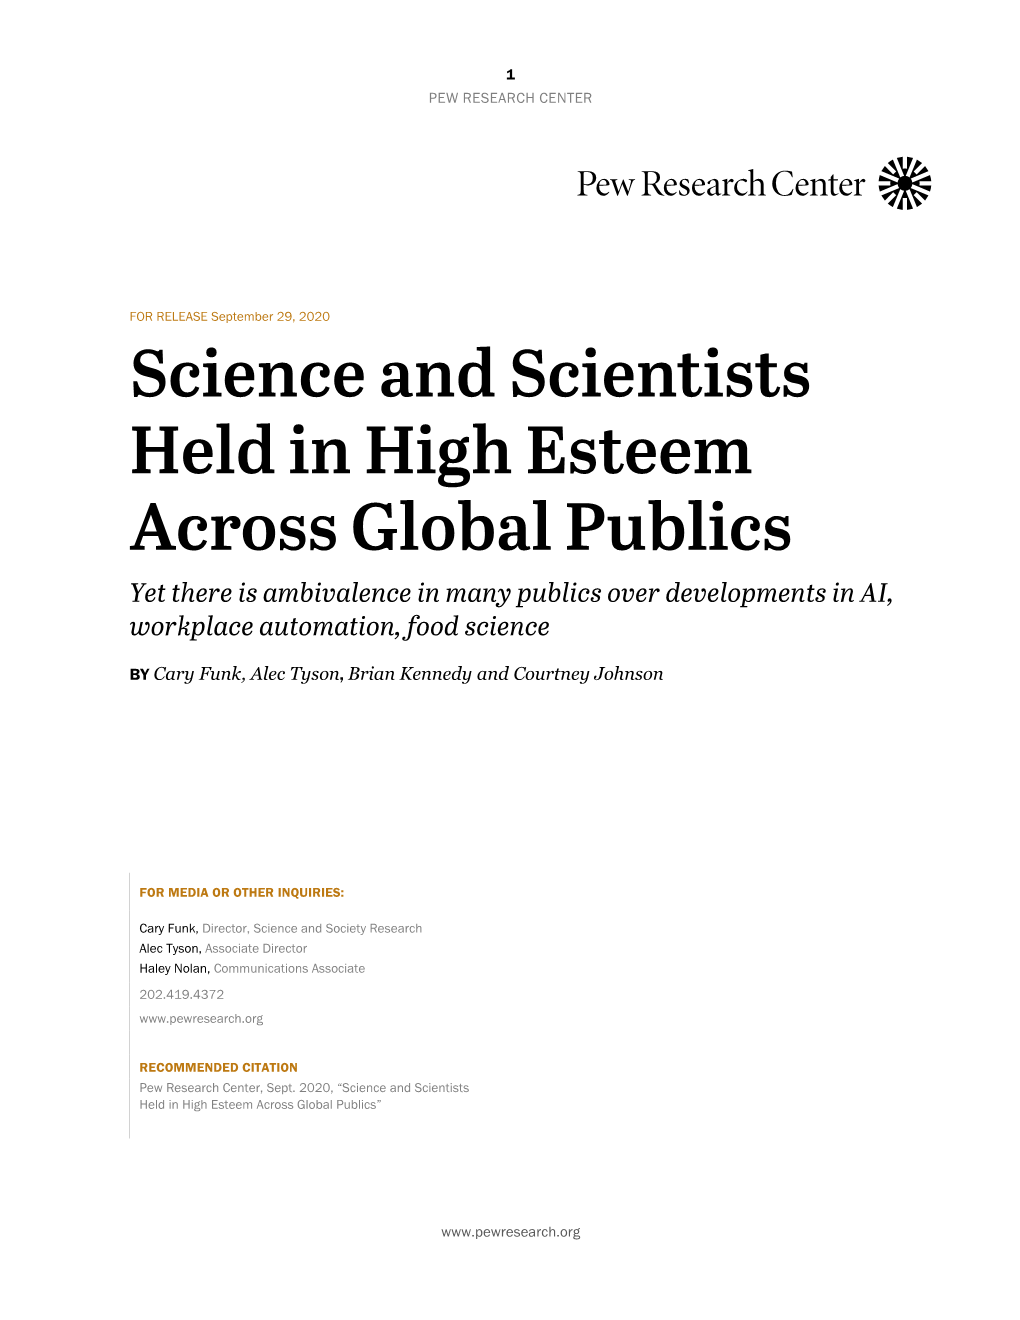 Science and Scientists Held in High Esteem Across Global Publics Yet There Is Ambivalence in Many Publics Over Developments in AI, Workplace Automation, Food Science